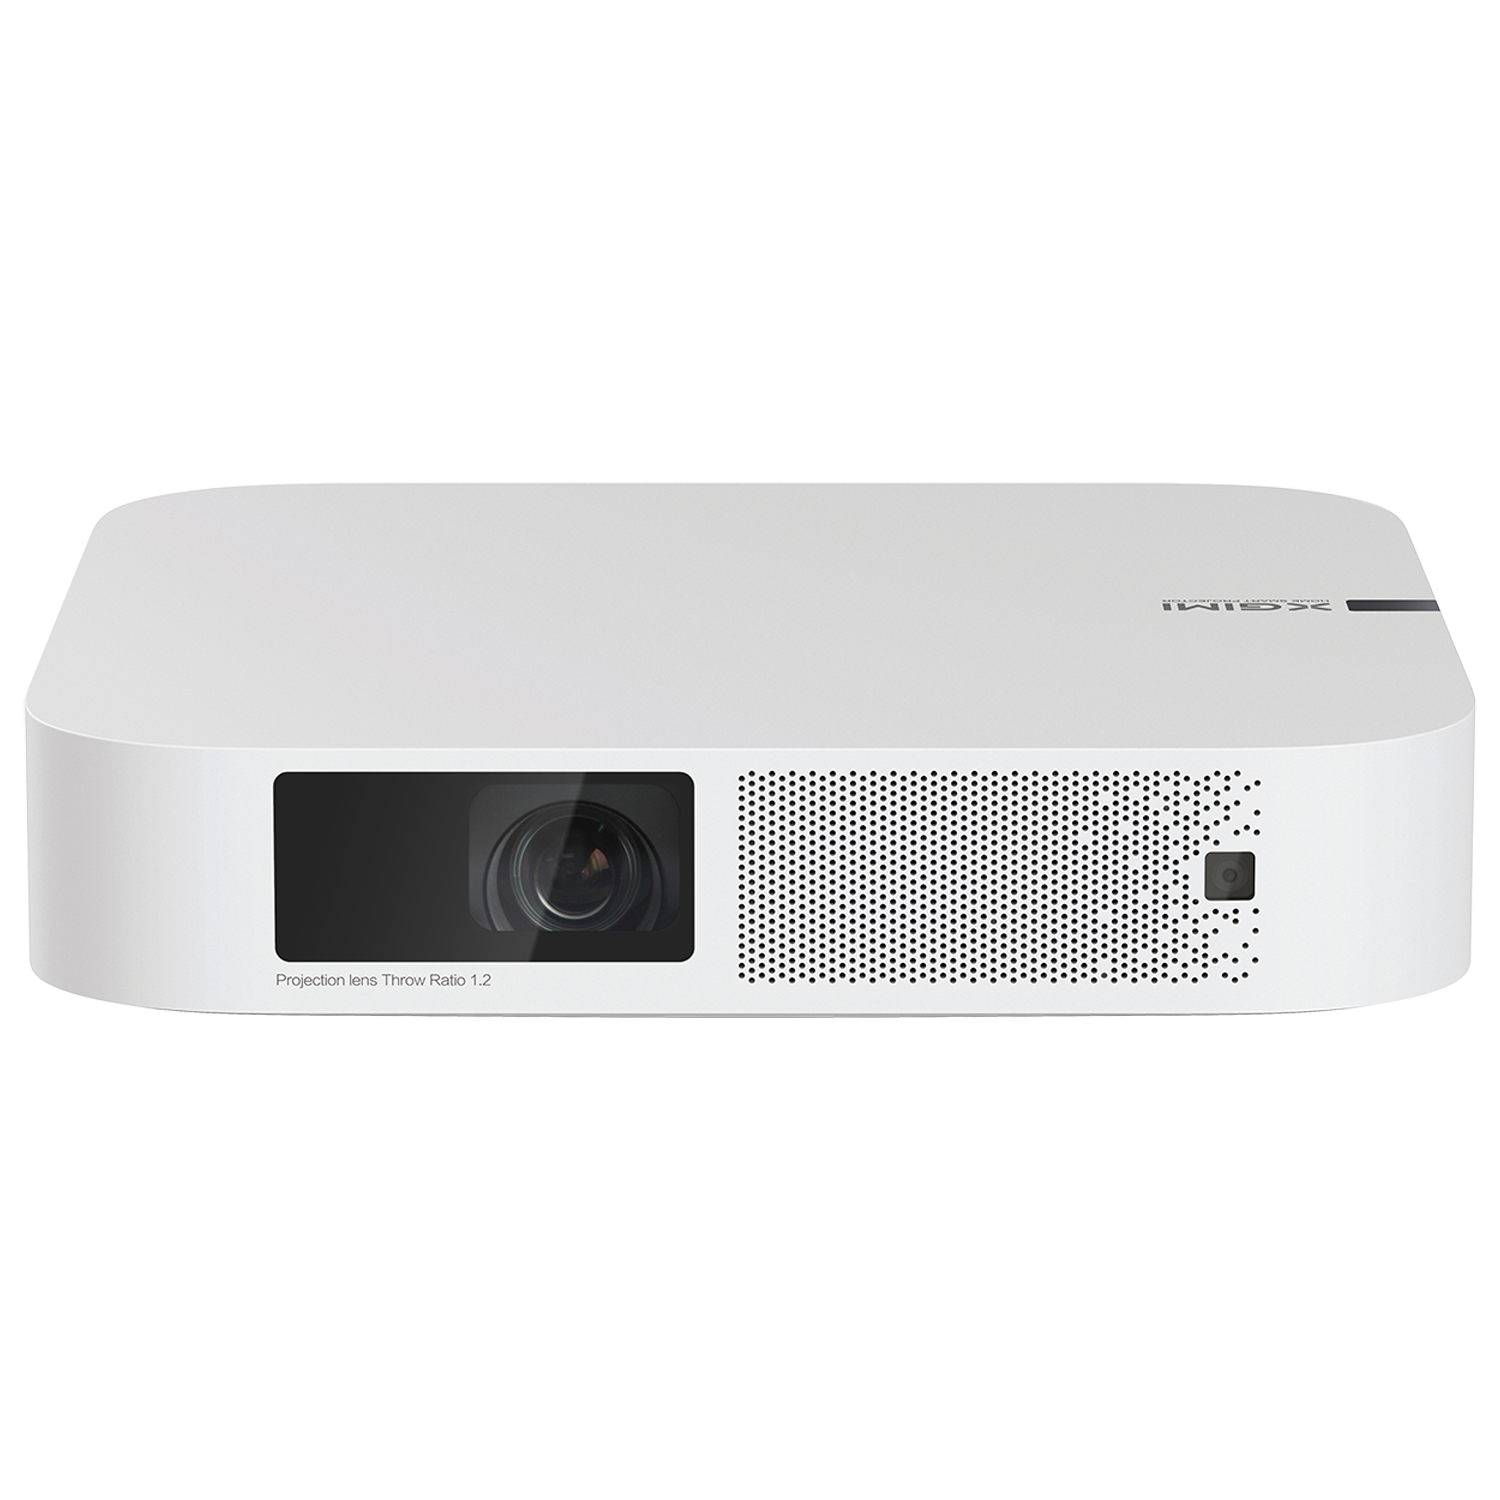 XGIMI Elfin 1080P FHD Smart Projector Home Theatre 800 ANSI Lumens 4K Supported, Harman Kardon Speakers, WiFi Bluetooth, Auto Focus, Keystone Correction, Android TV 10.0